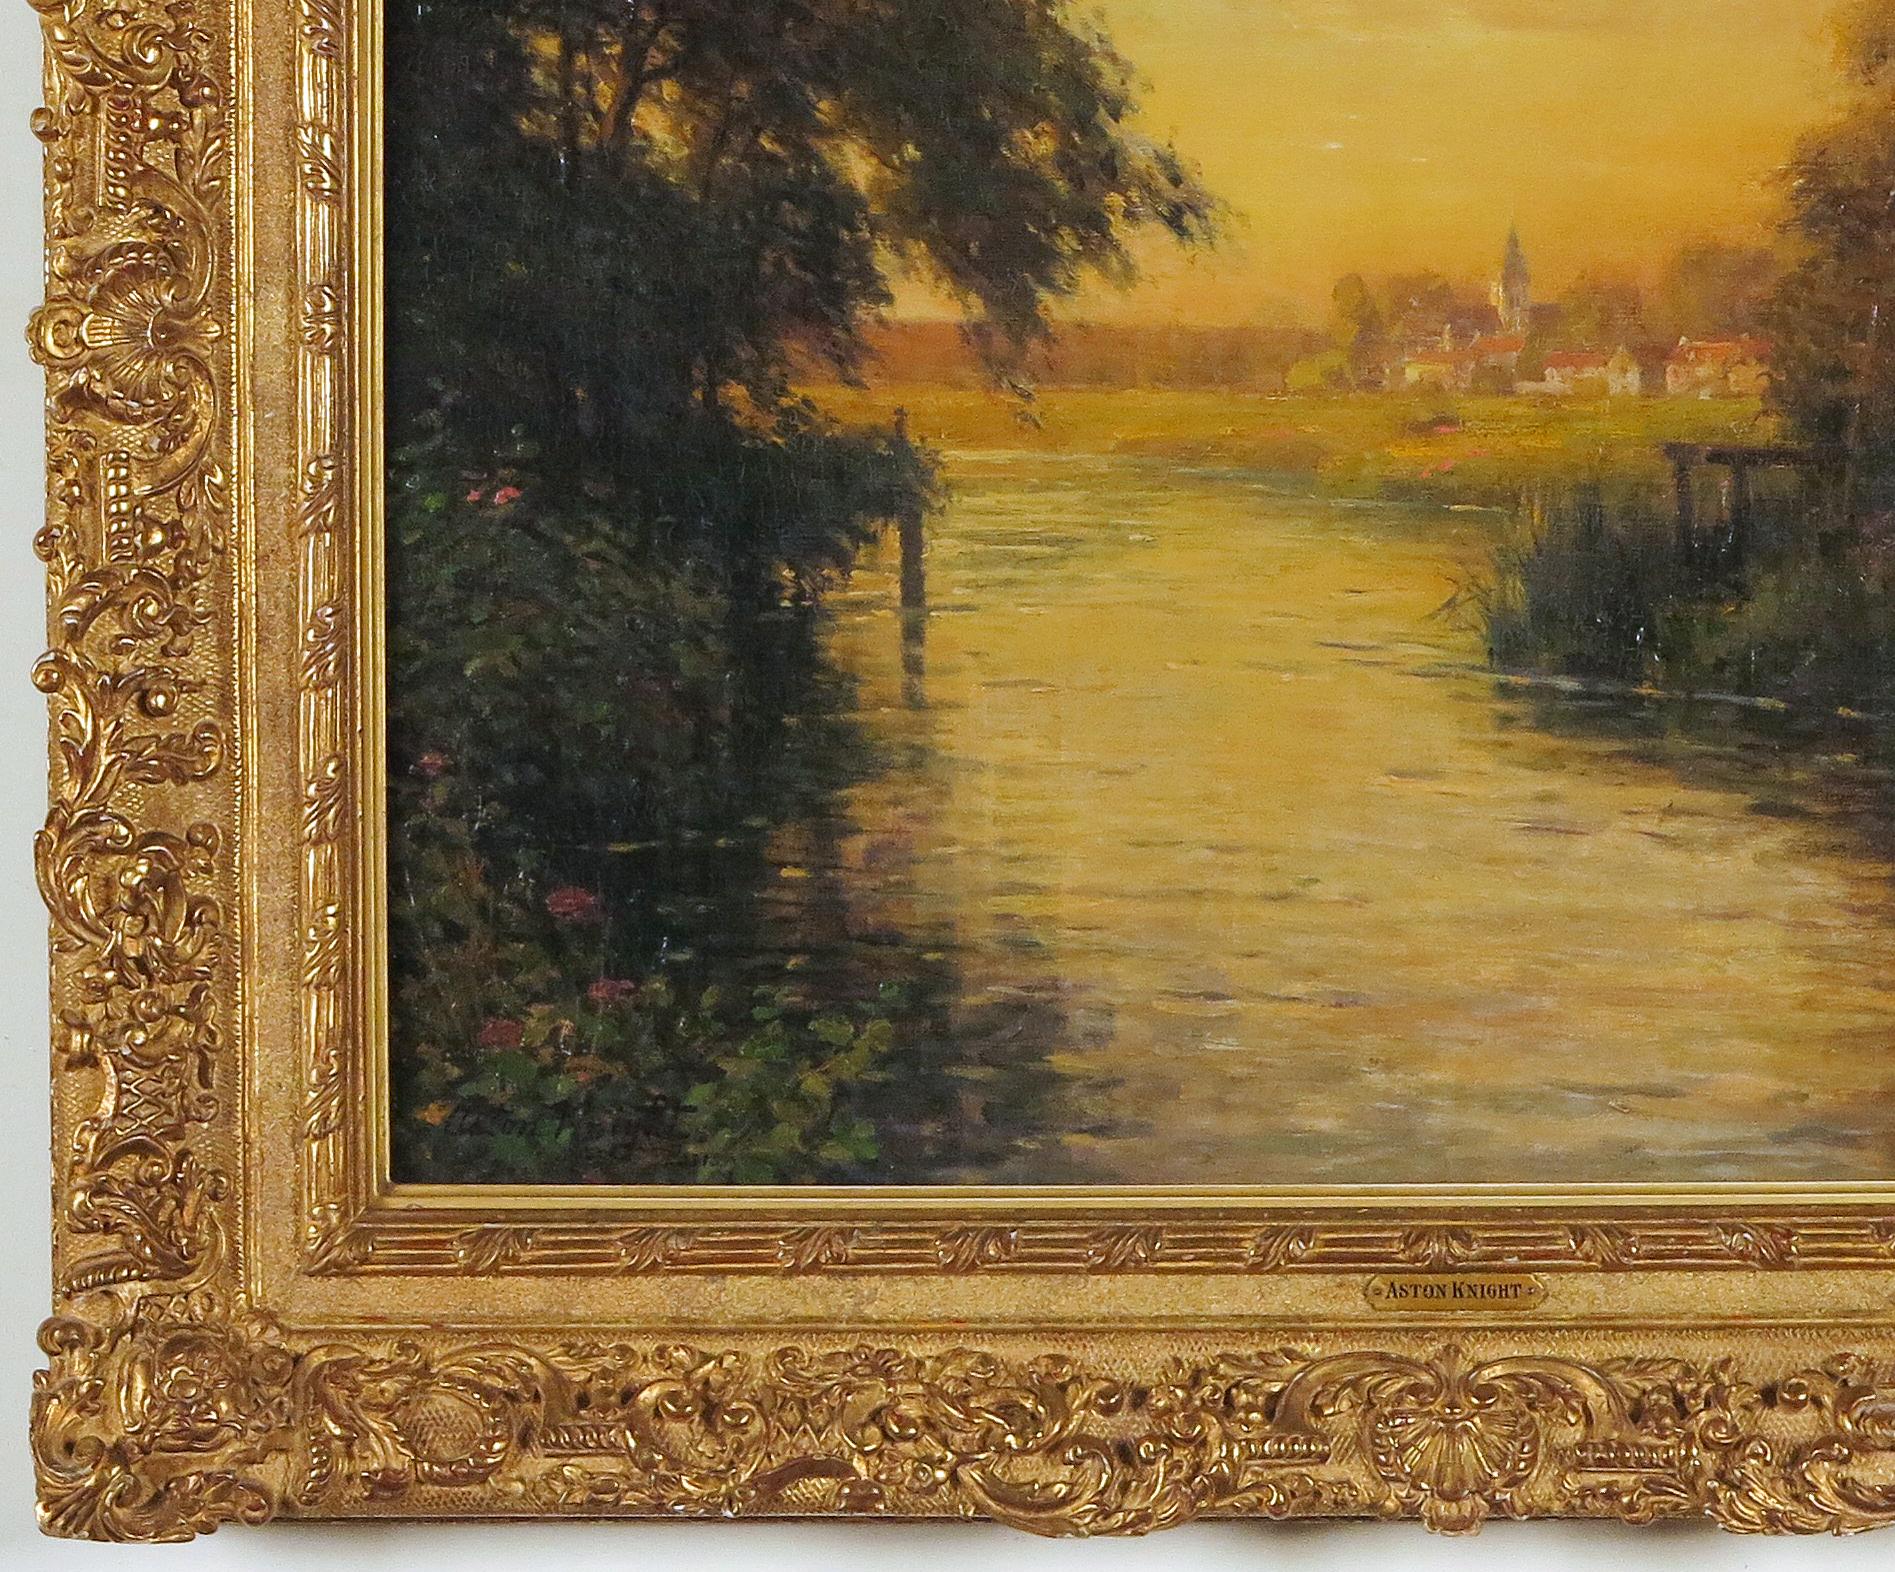 Twilight along the River Bend  - Post-Impressionist Painting by Louis Aston Knight